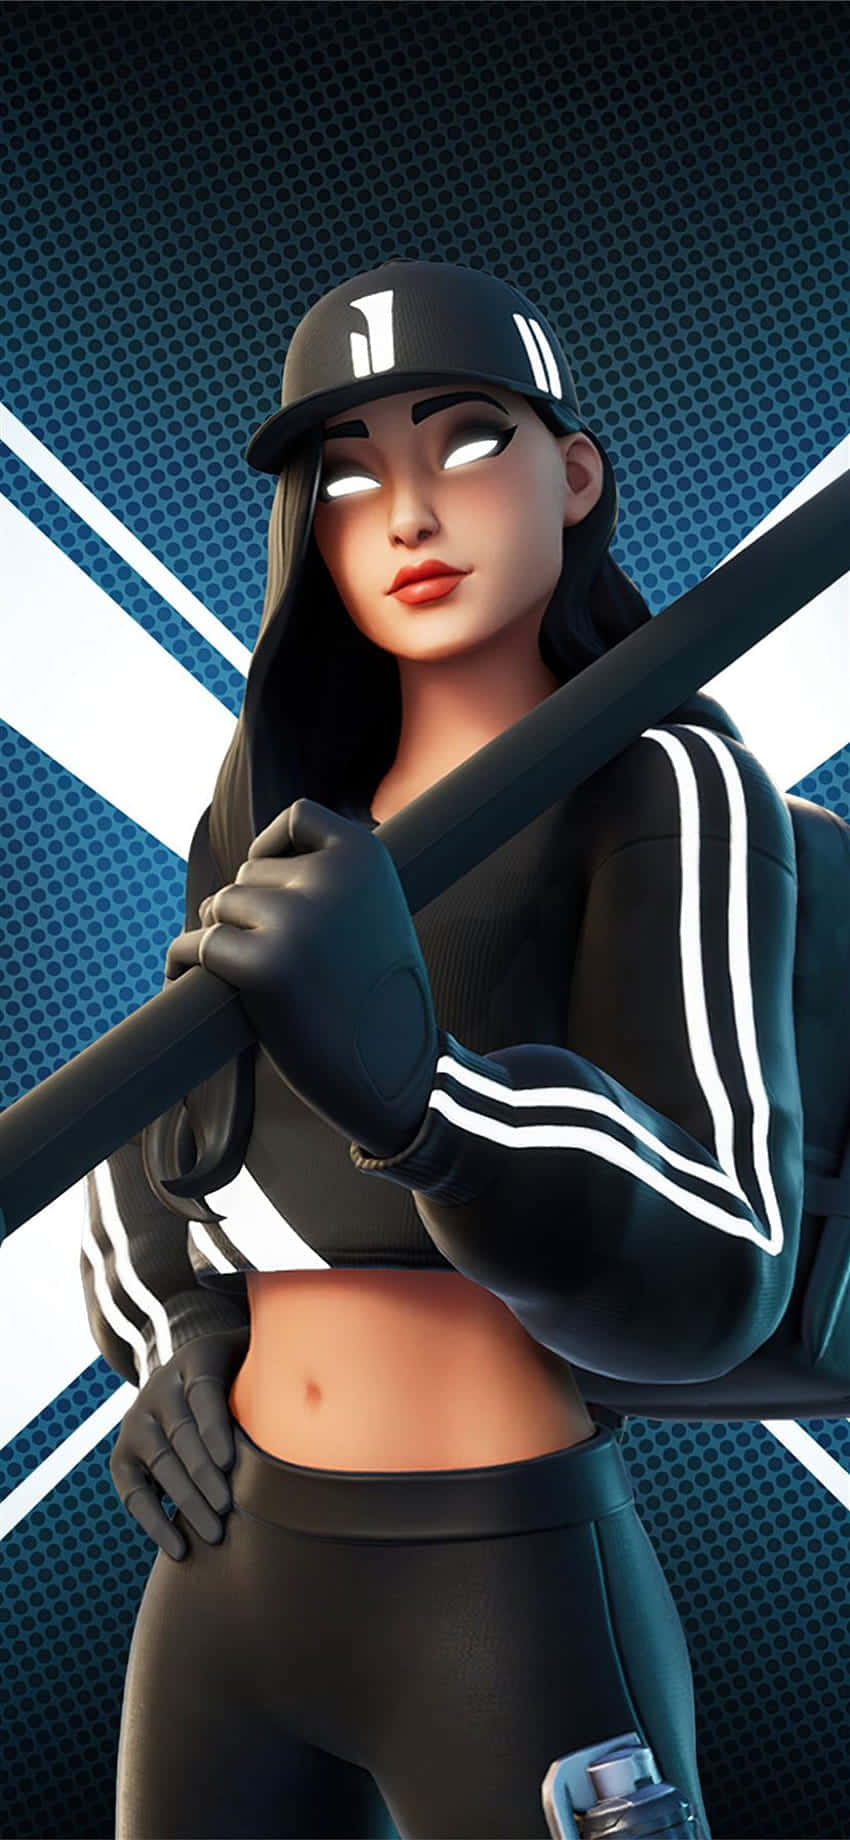 Unlock the Ruby Fortnite Skin and bring your game to a new level! Wallpaper